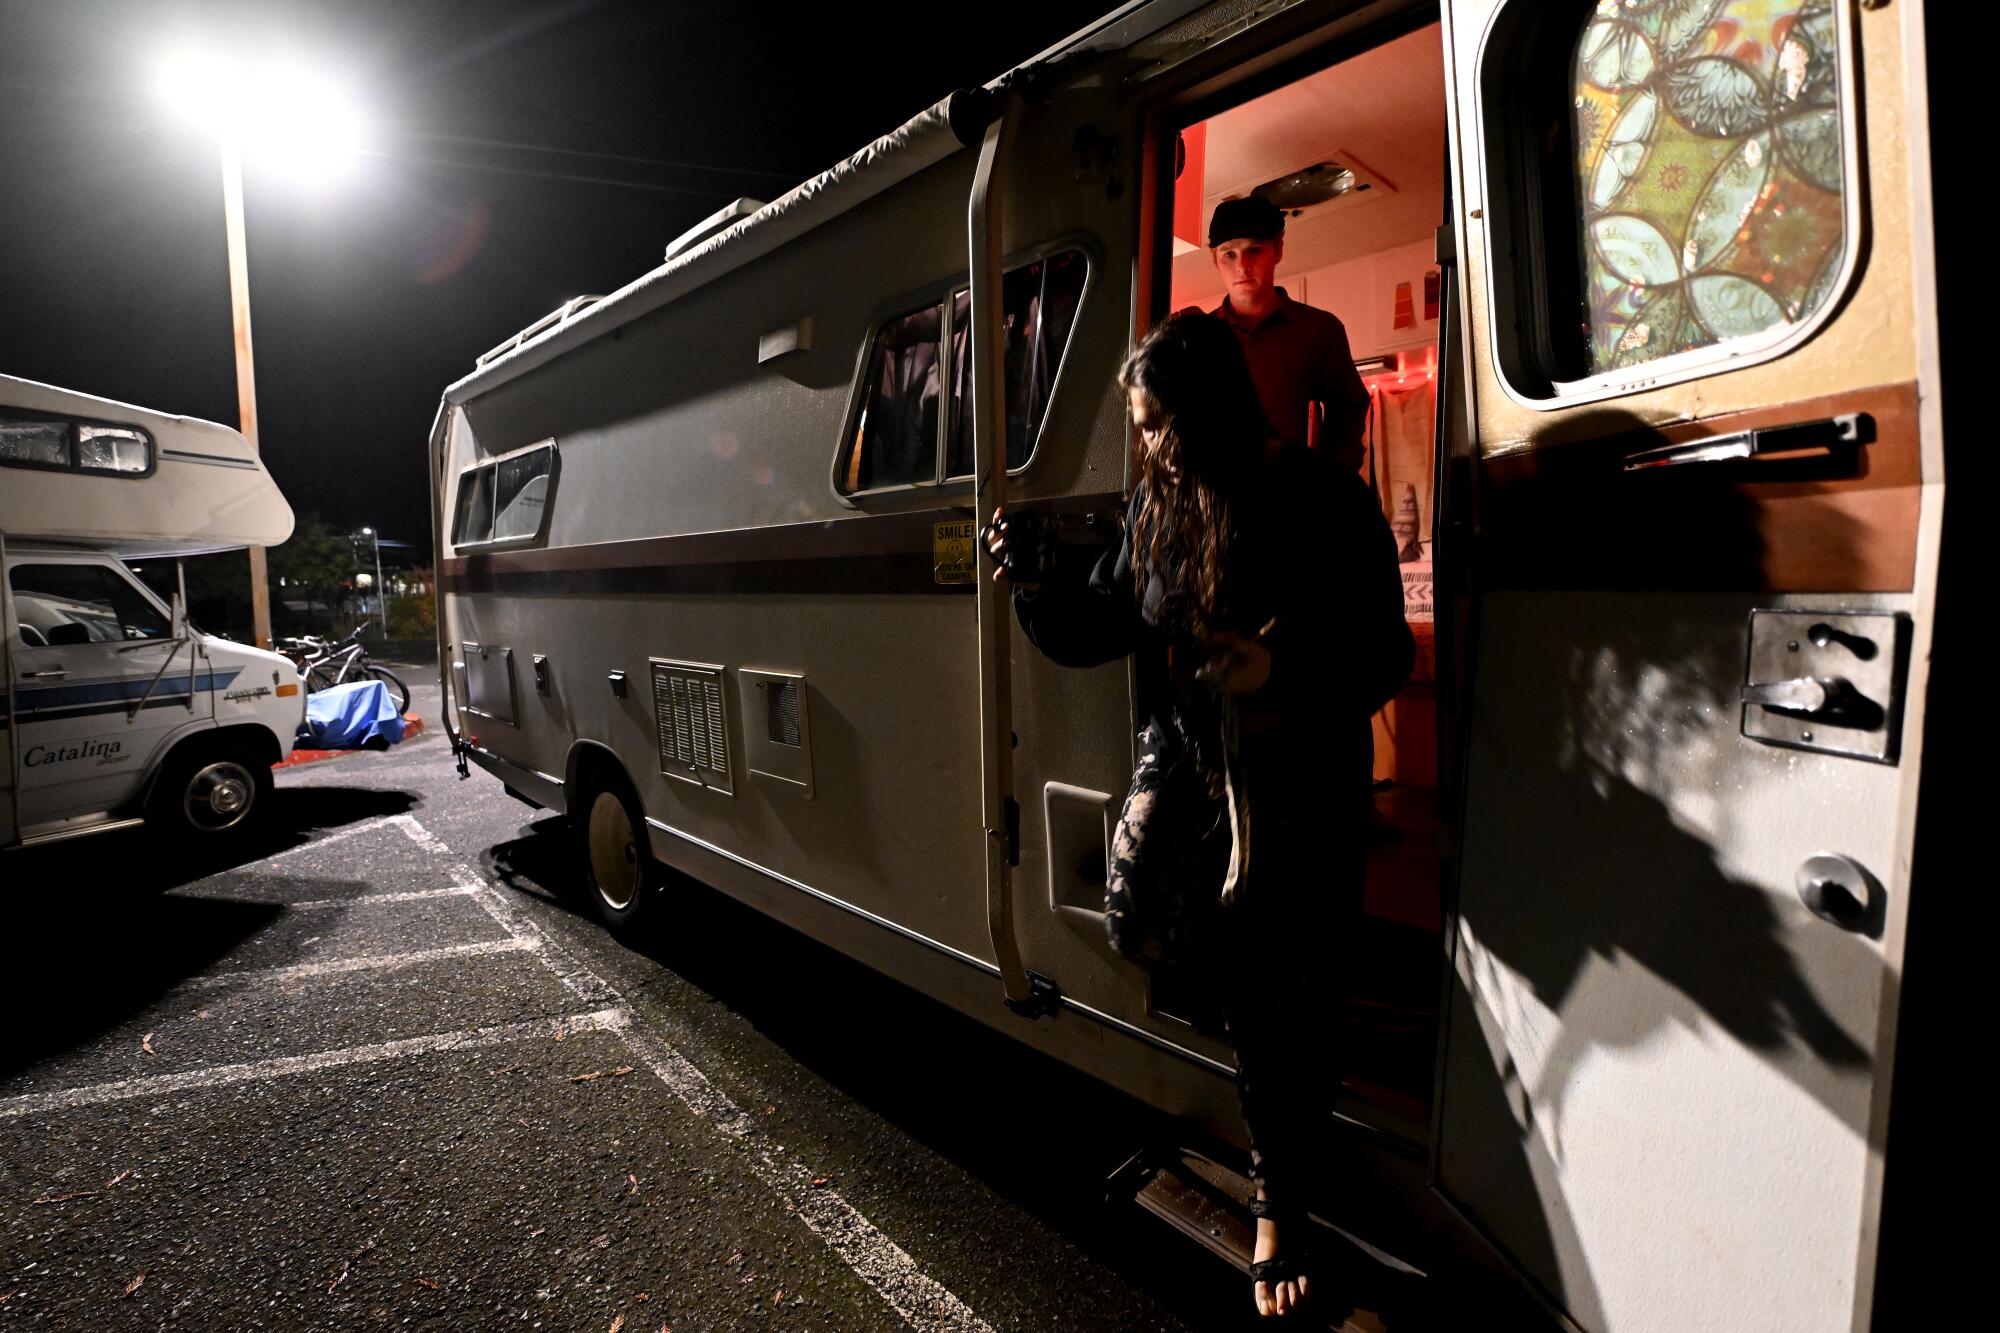 Two people stand in the doorway of a motor home in a parking lot at night.